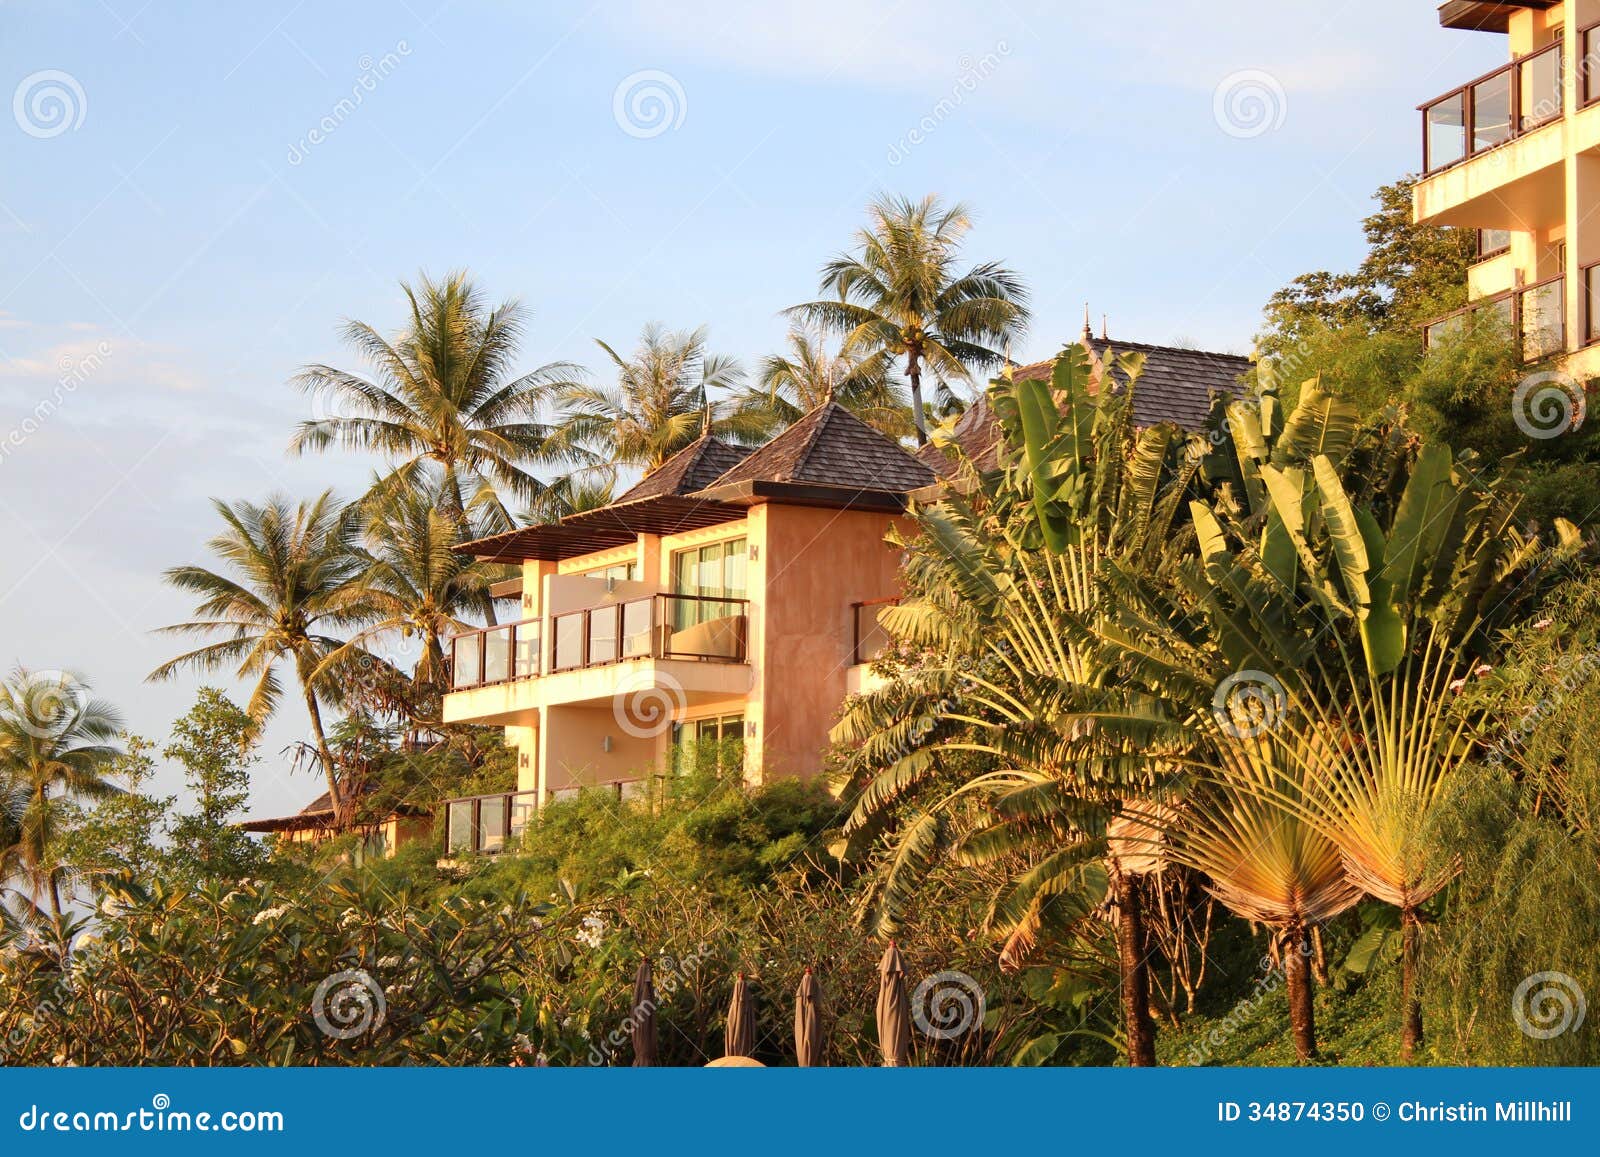  Hotel  Bungalows  In Thailand Stock Photo Image of look 